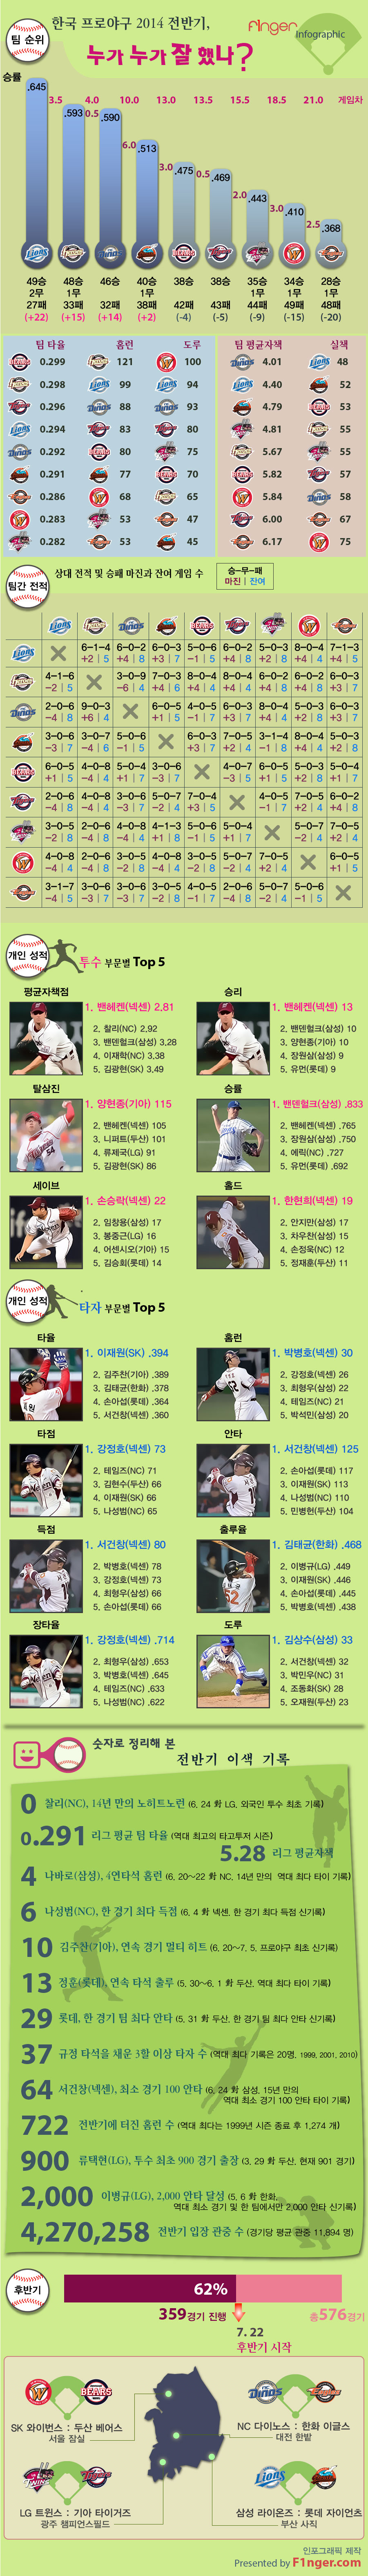 2014-KBO-front-half-infographic-by-F1nger